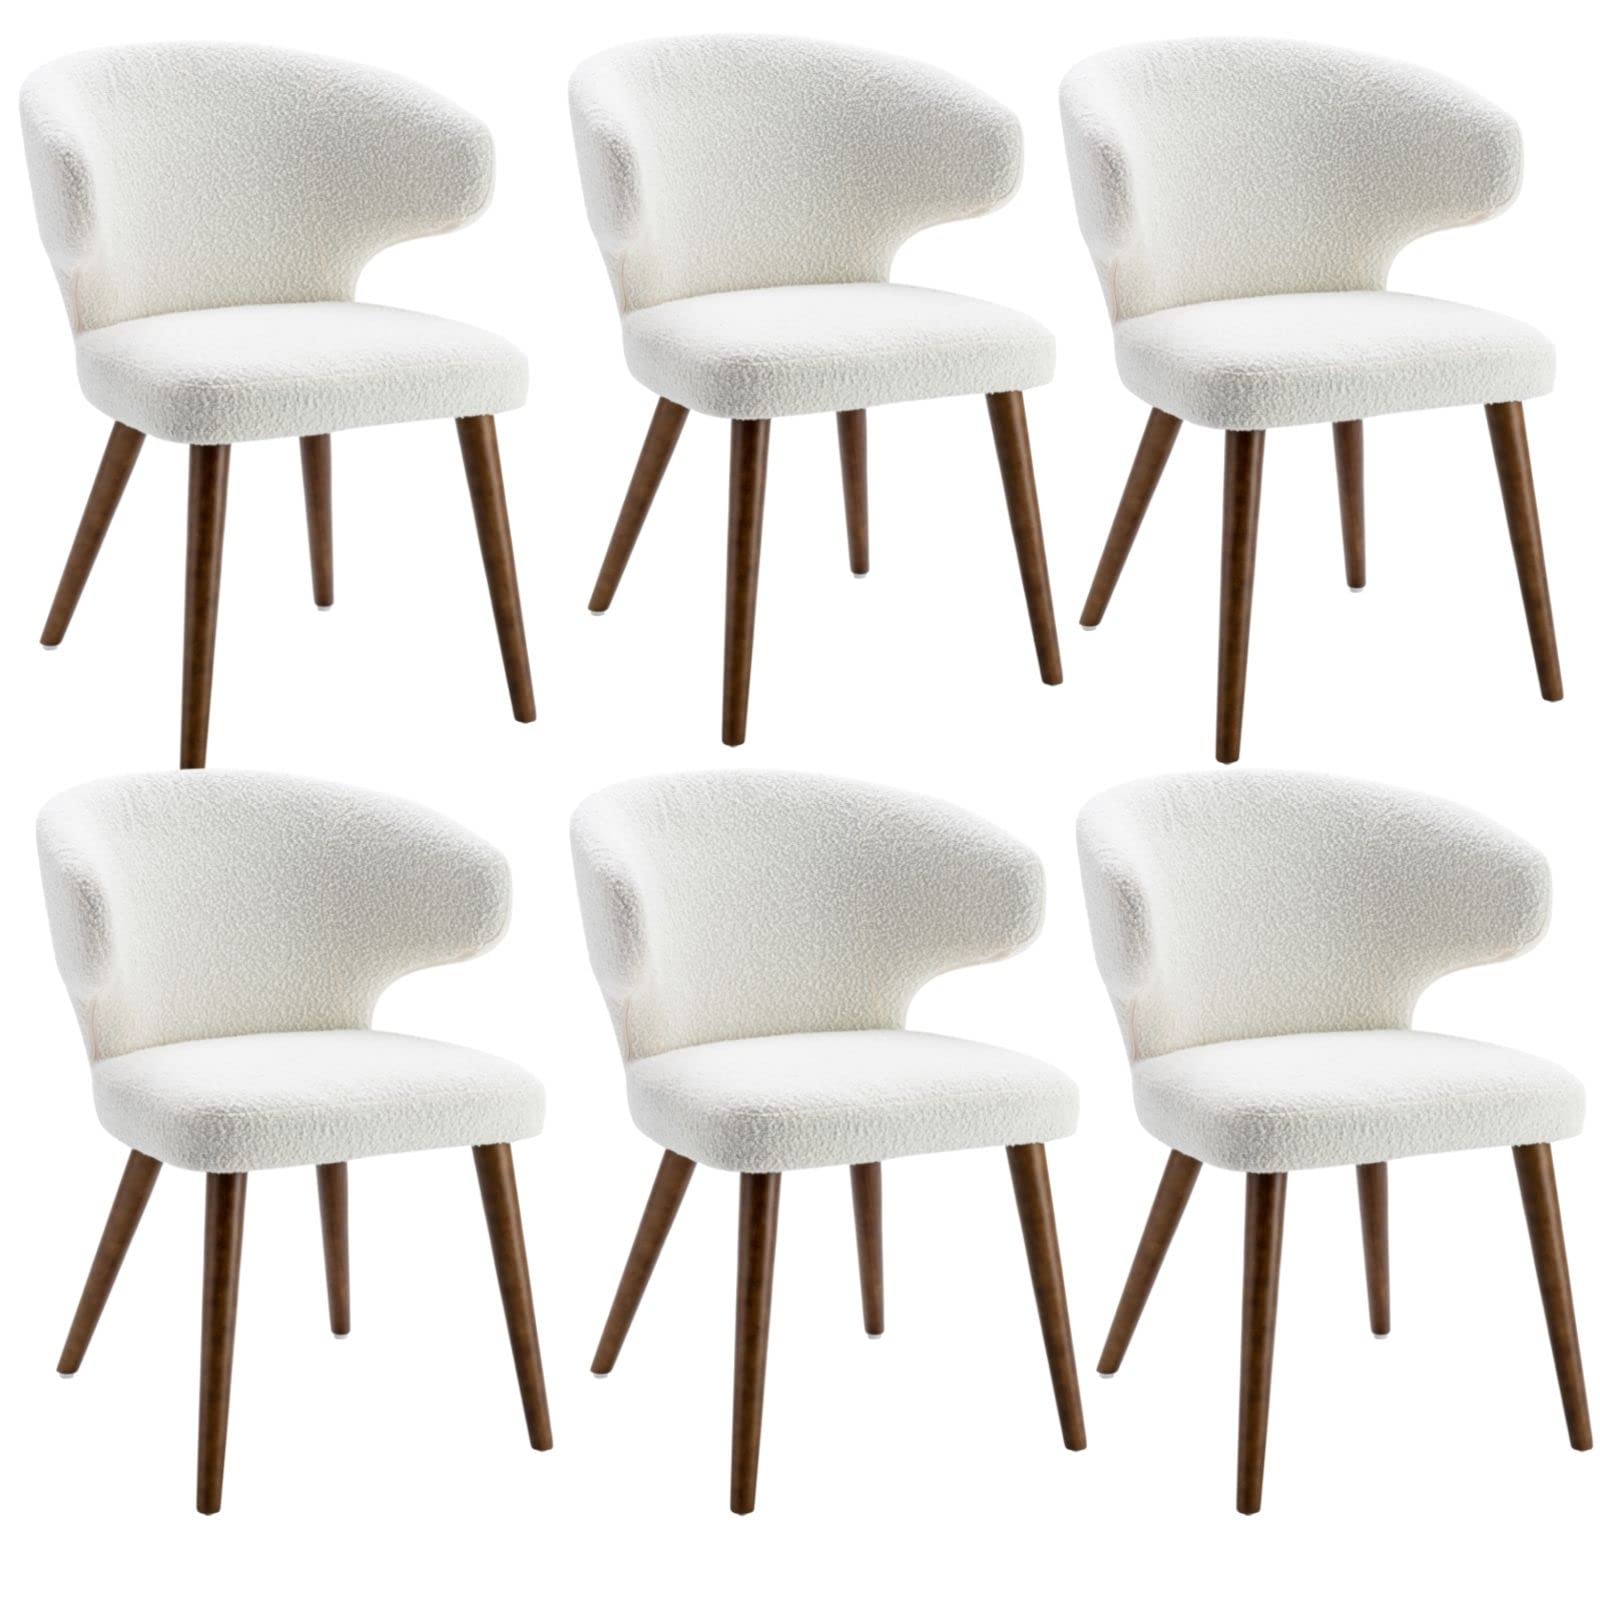 HNY Mid century Modern Dining chairs Set of 6, Upholstered curved Wingback Accent Arm chairs, Faux Sherpa Side chairs with Solid